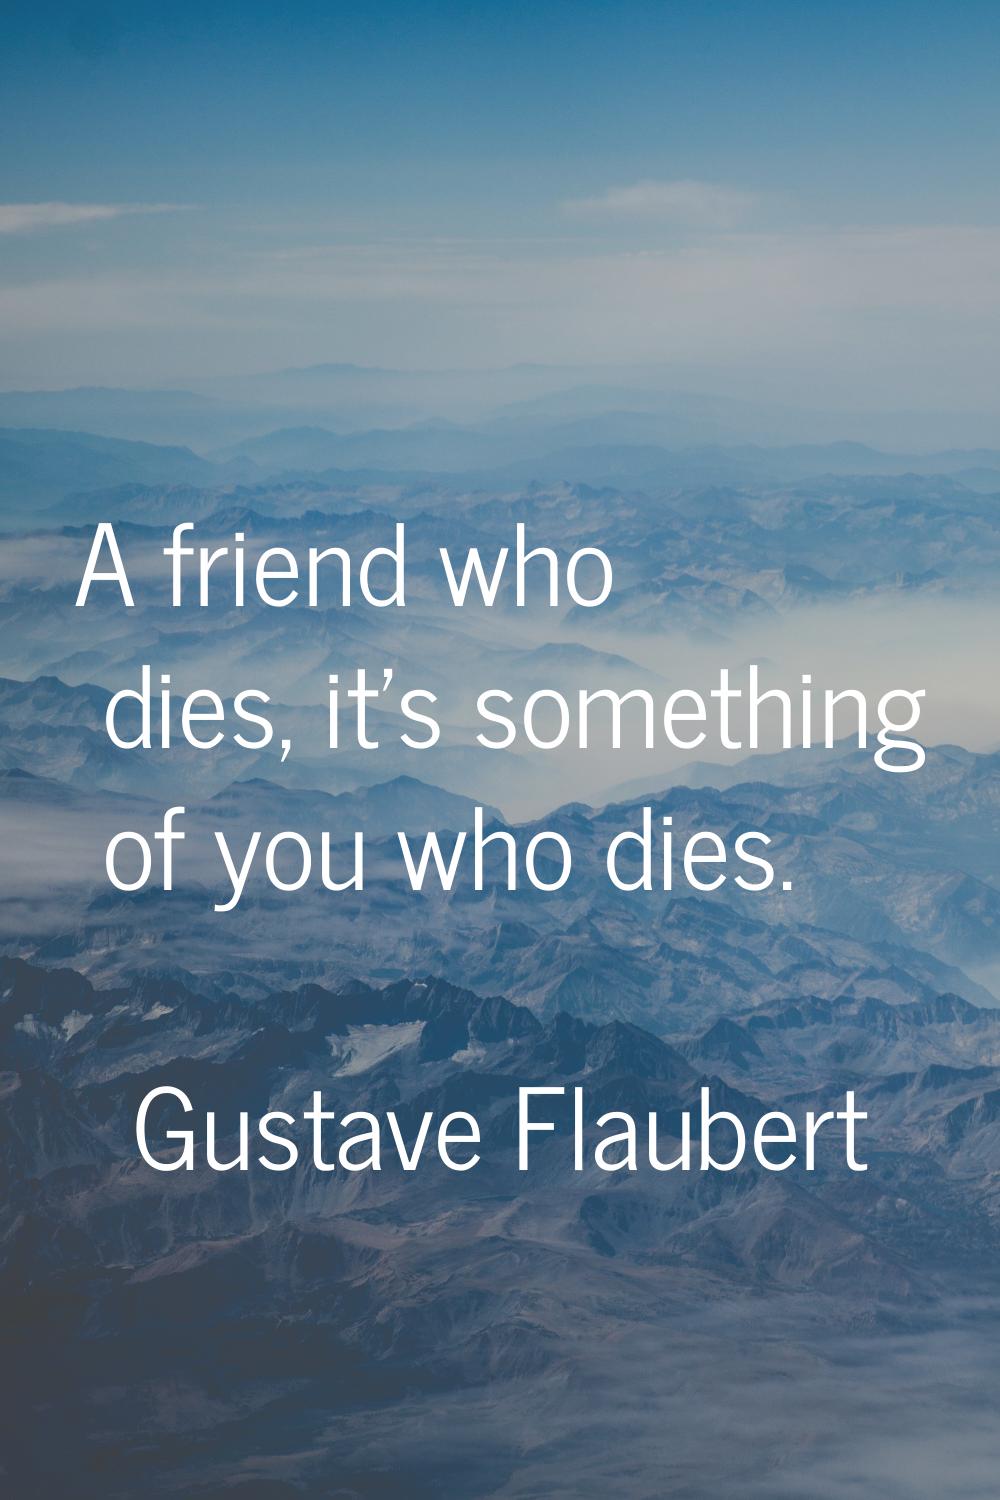 A friend who dies, it's something of you who dies.